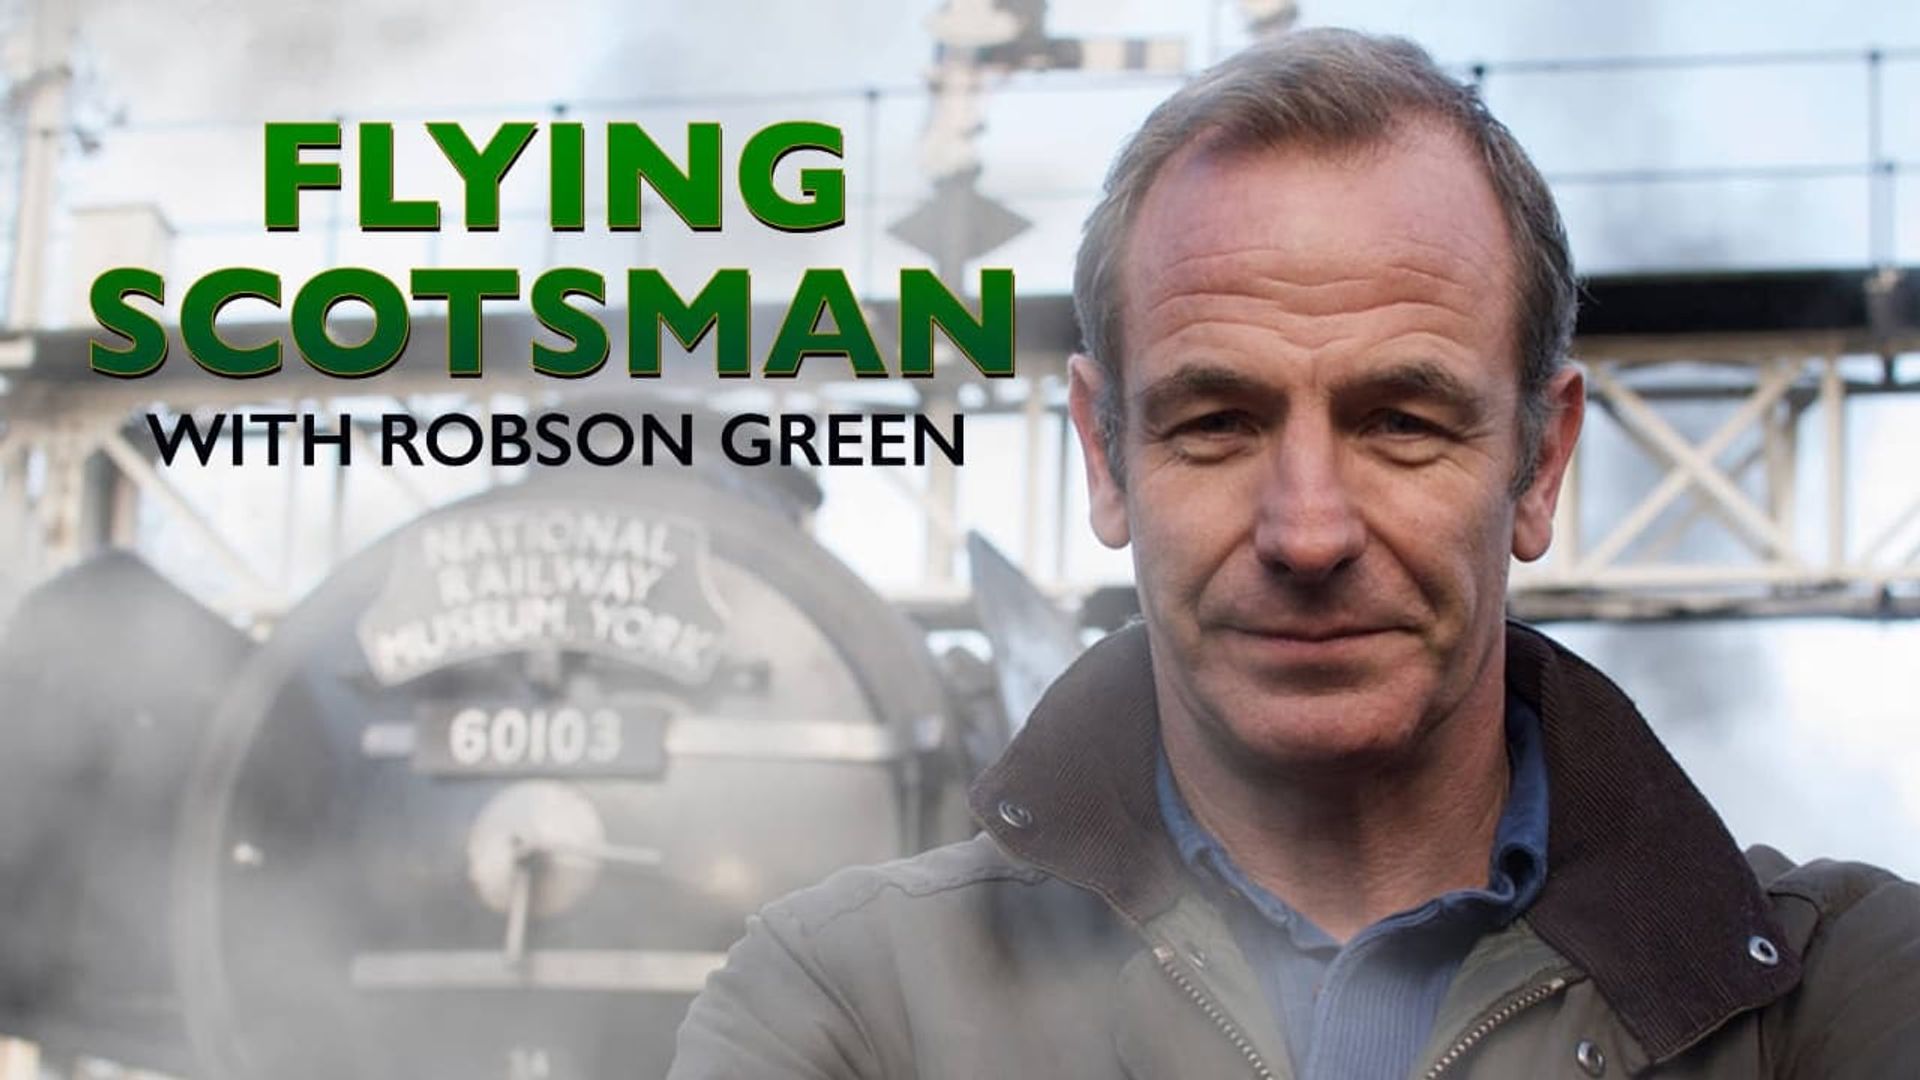 Flying Scotsman with Robson Green background